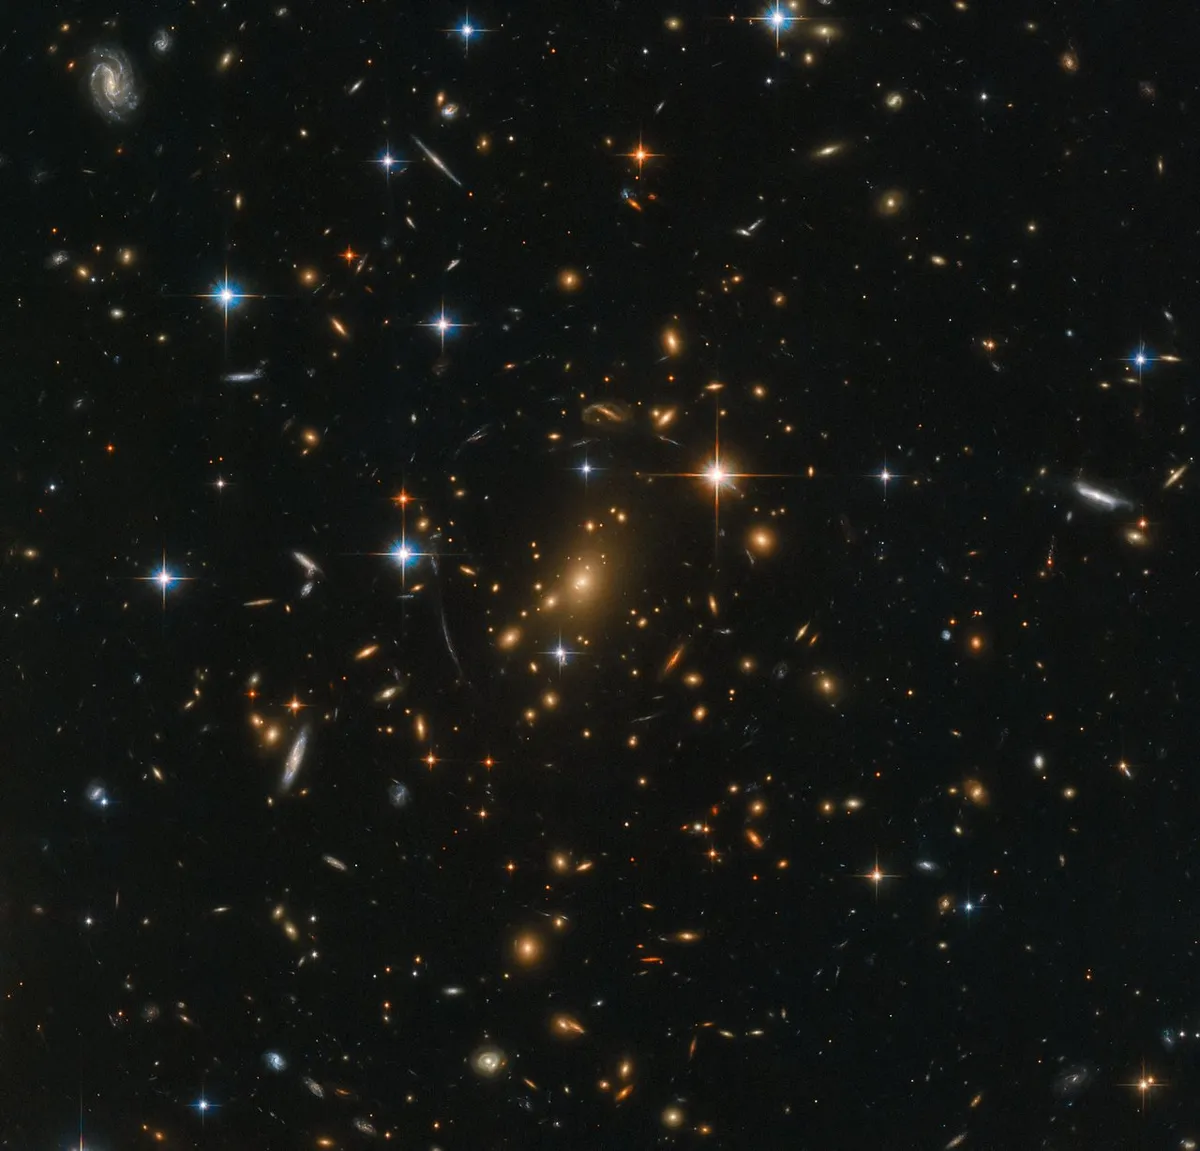 Galaxy clusters are ideal objects to study in the search for dark energy. Credit: ESA/Hubble & NASA, RELICS